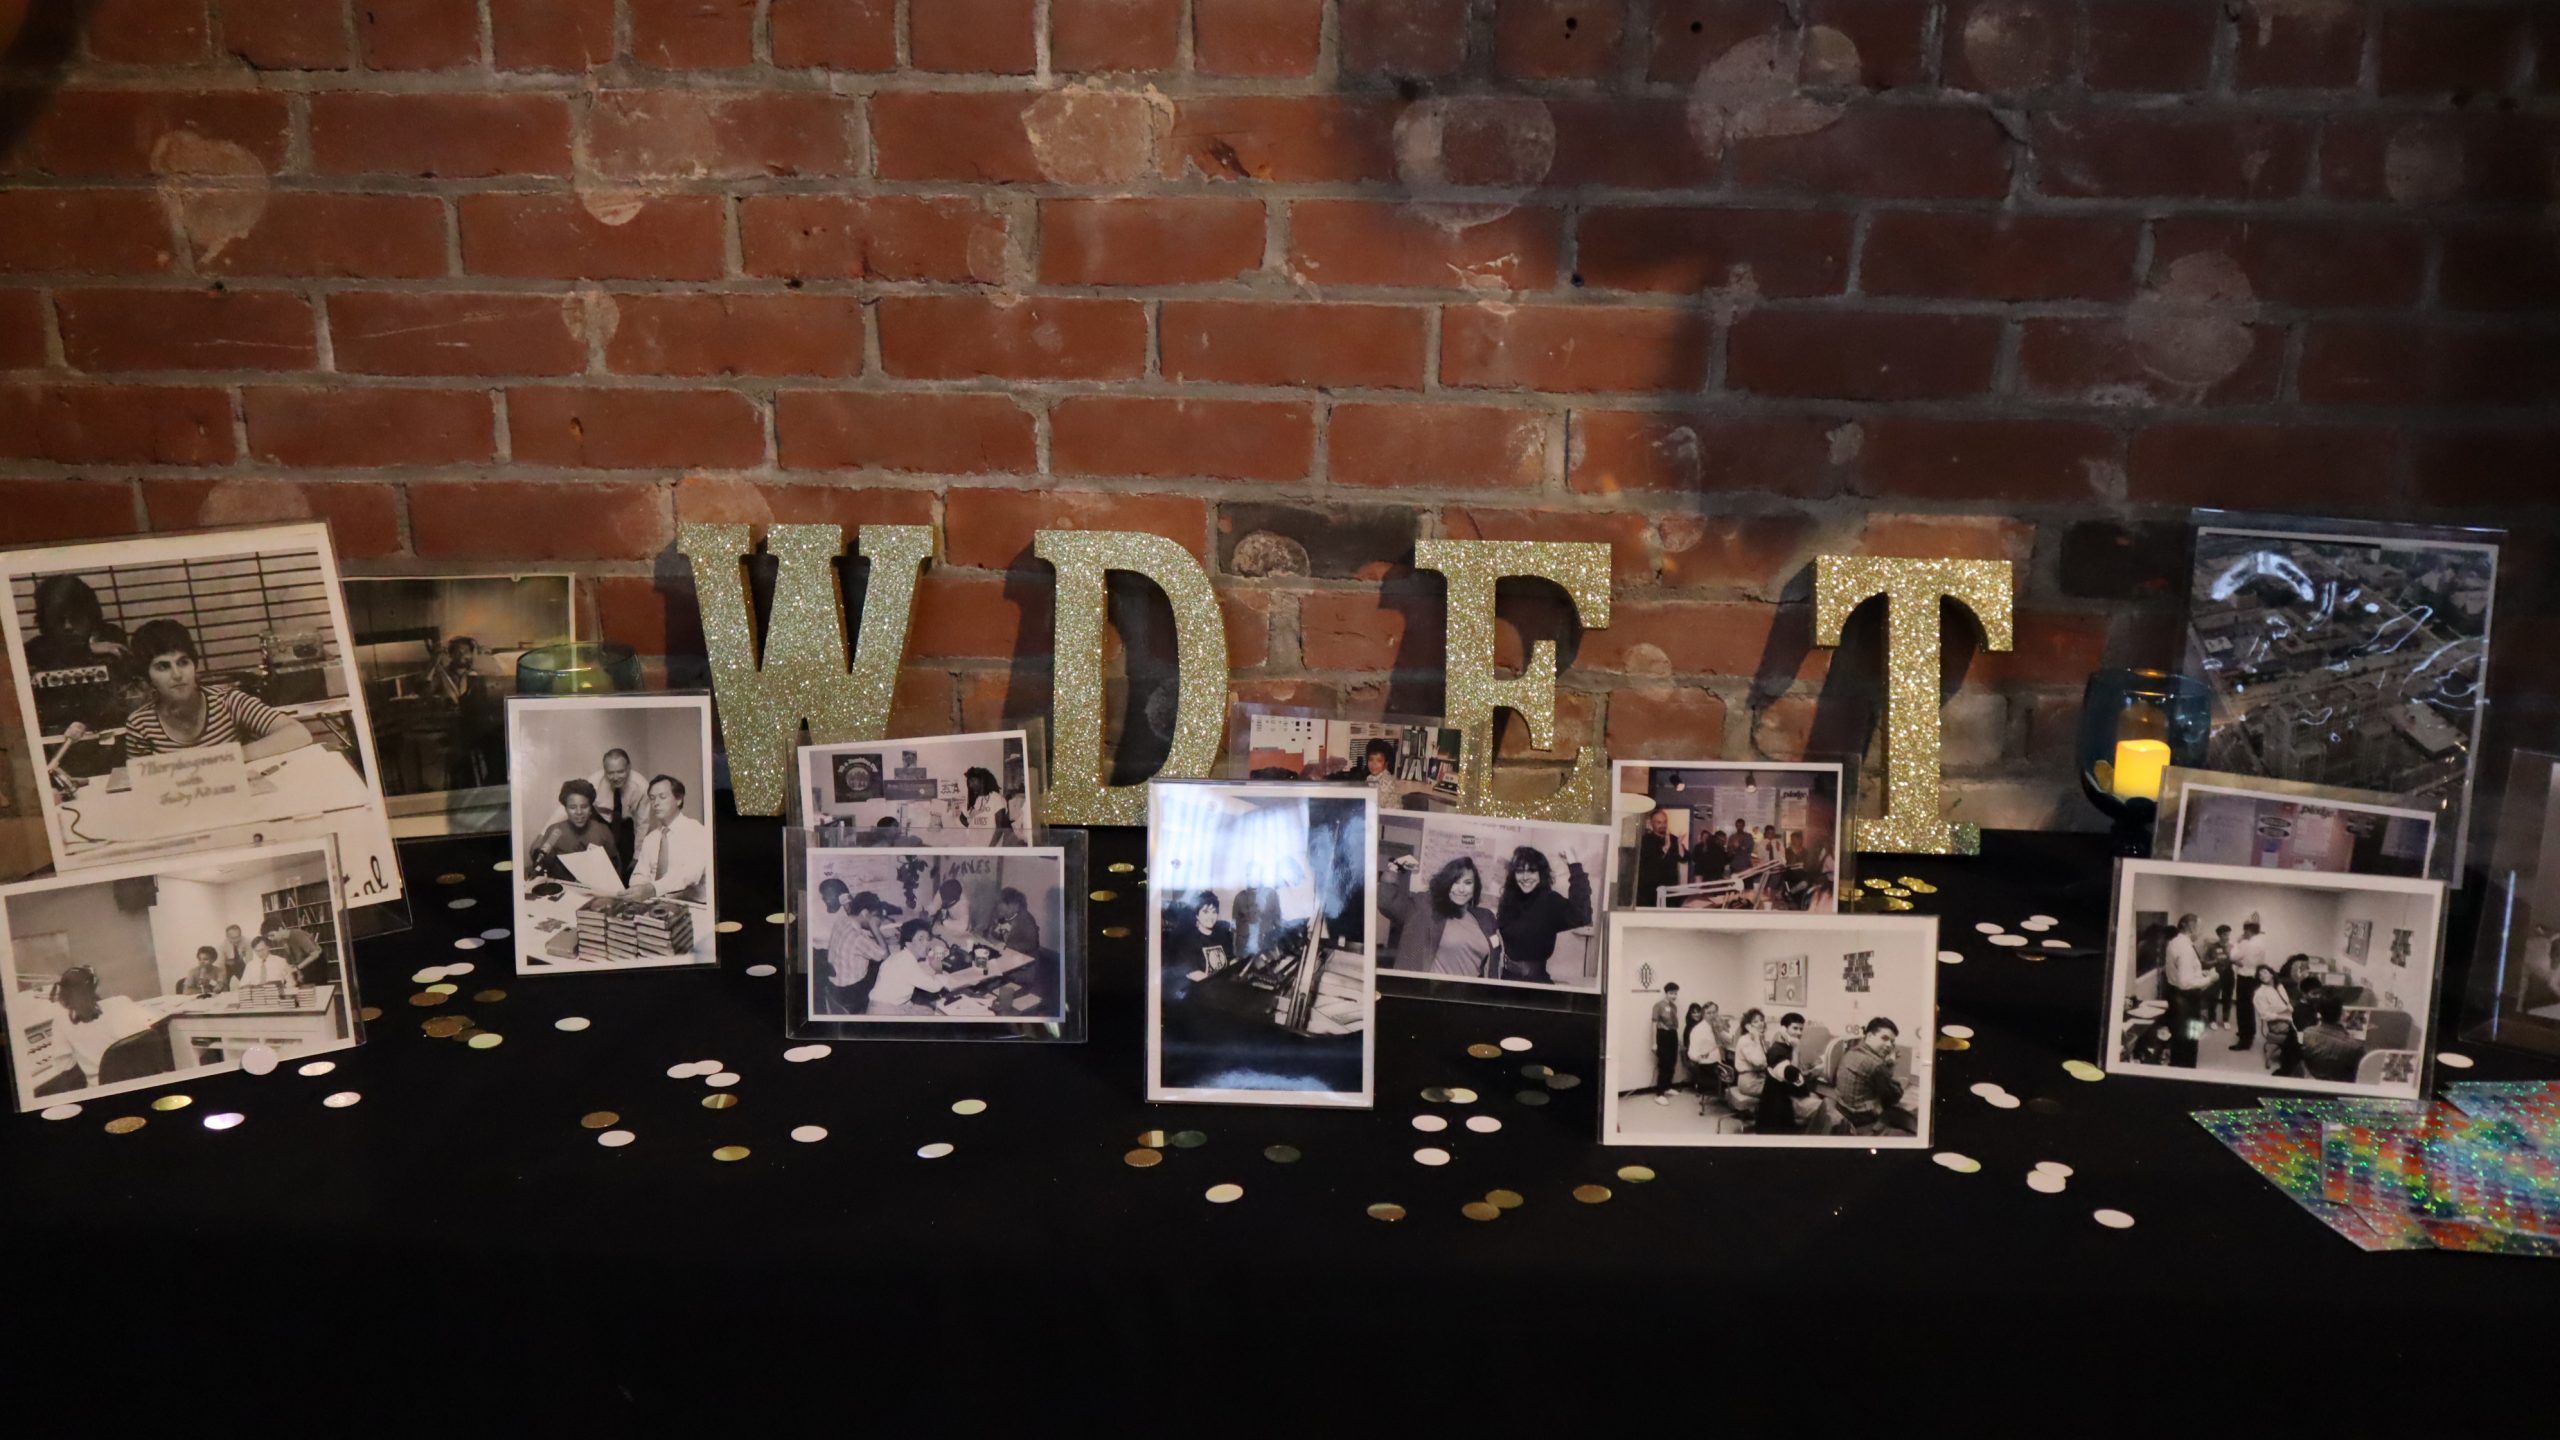 A display of photos from WDET.